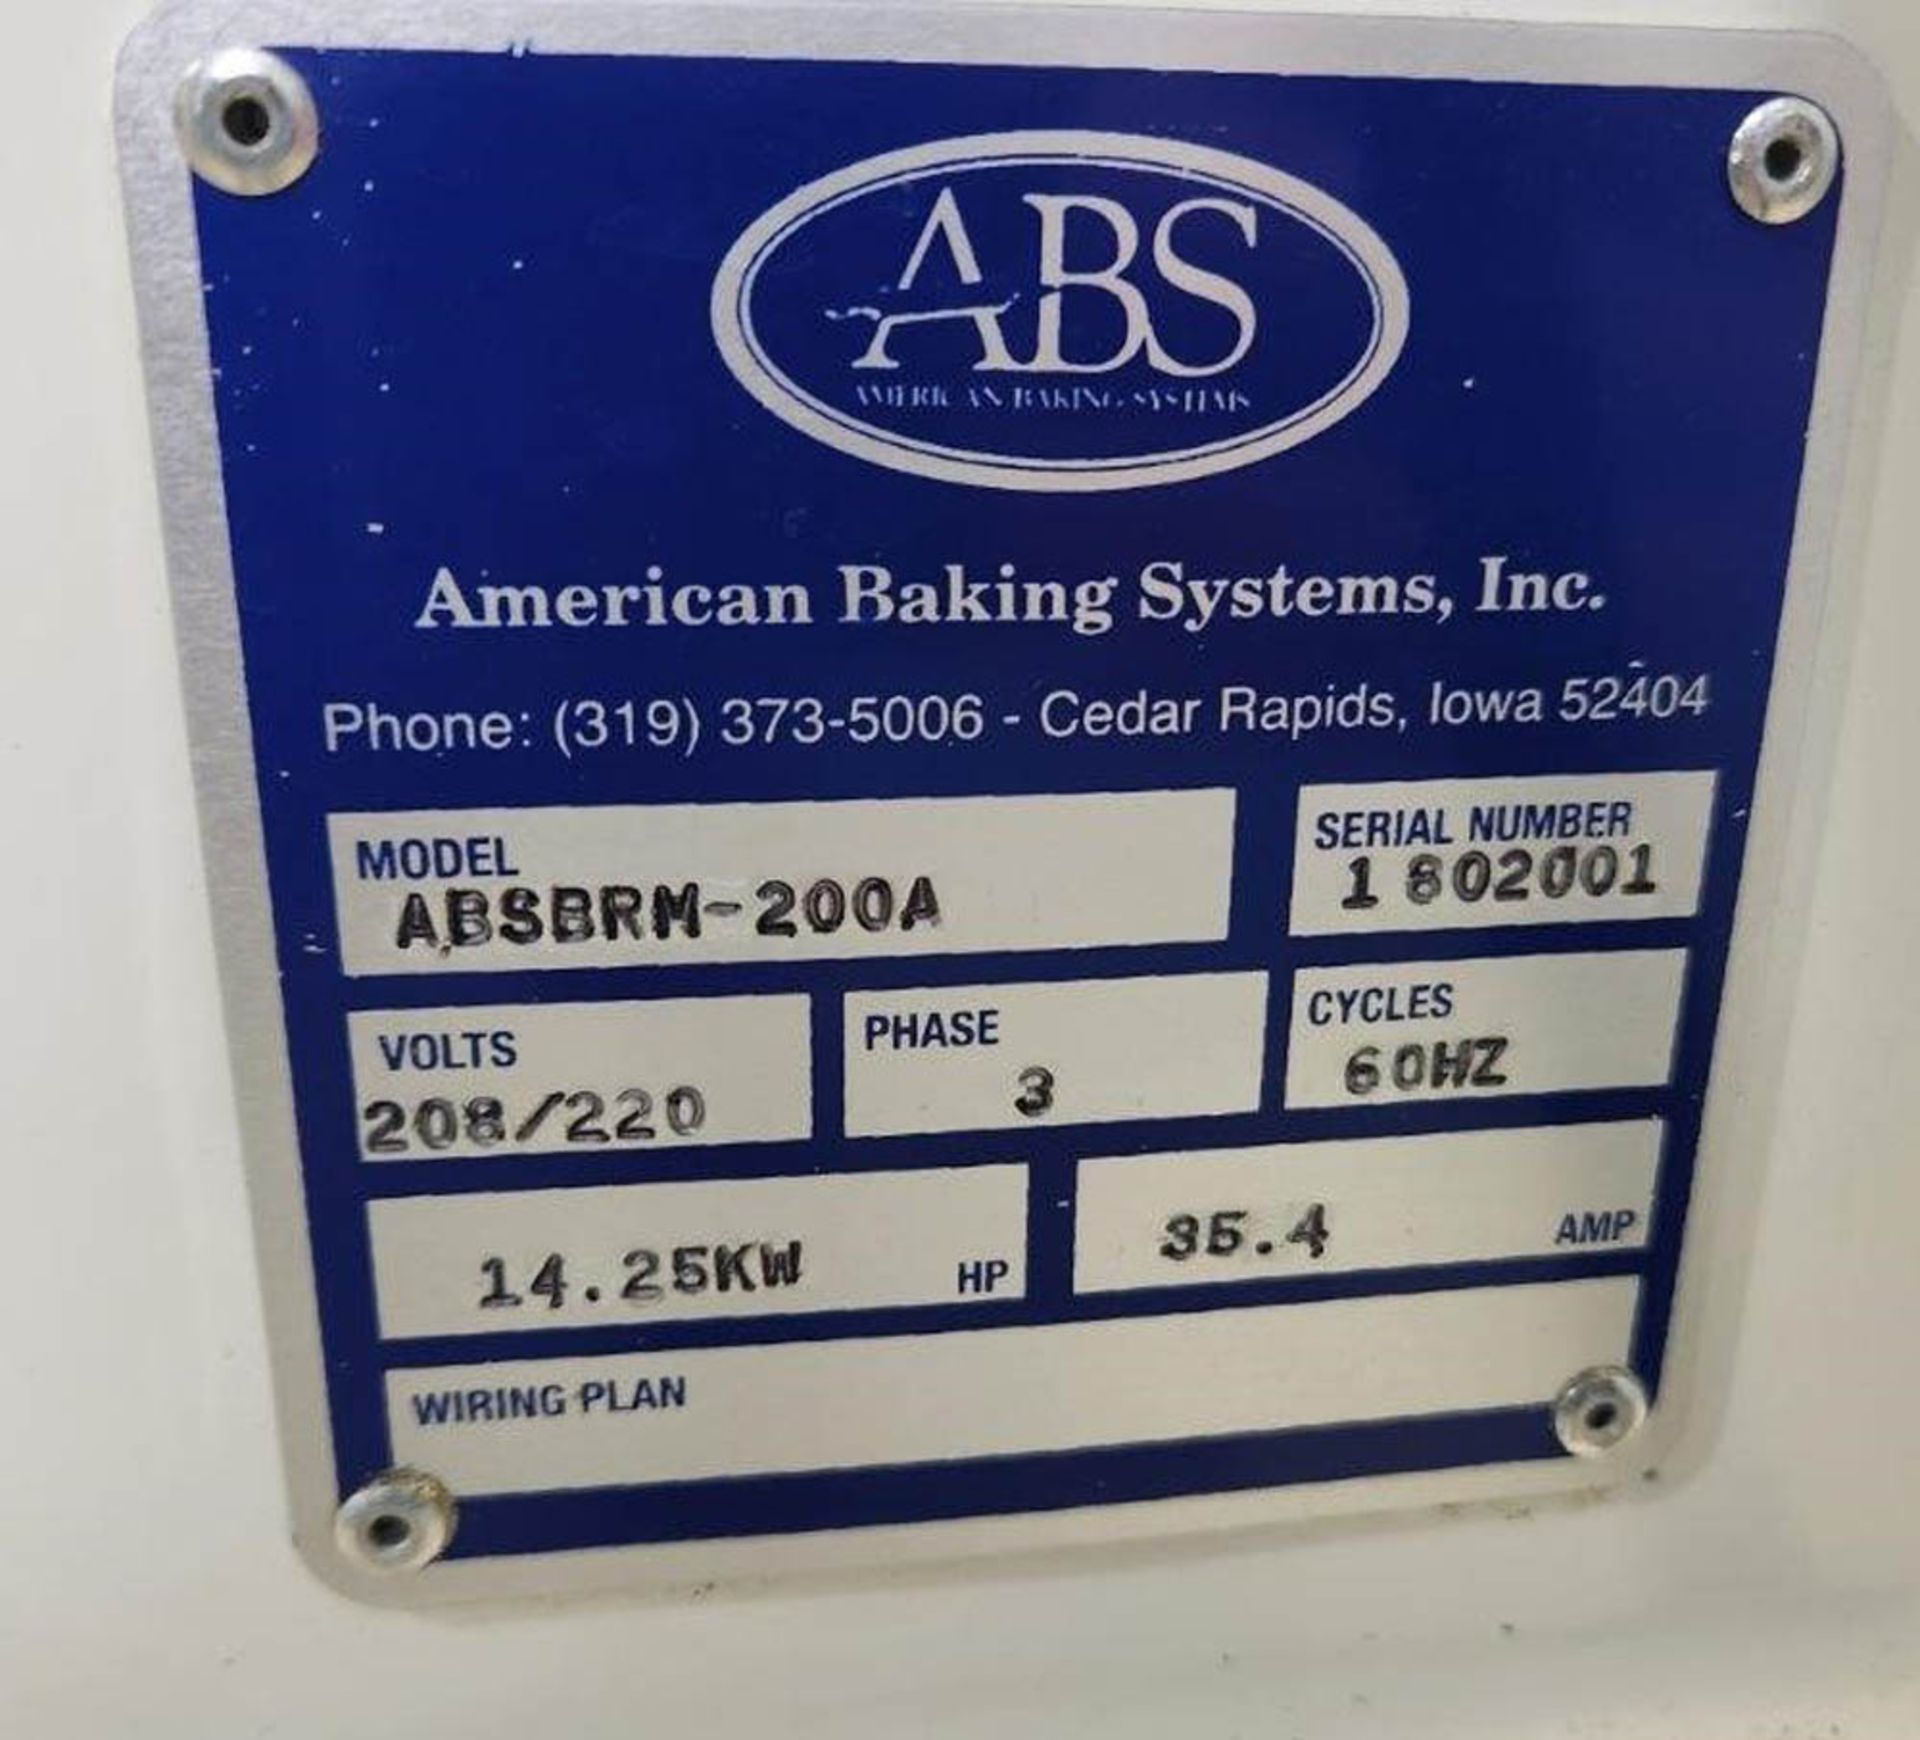 American Baking Systems ABSBRM-200A Spiral Dough Mixer - Image 6 of 6